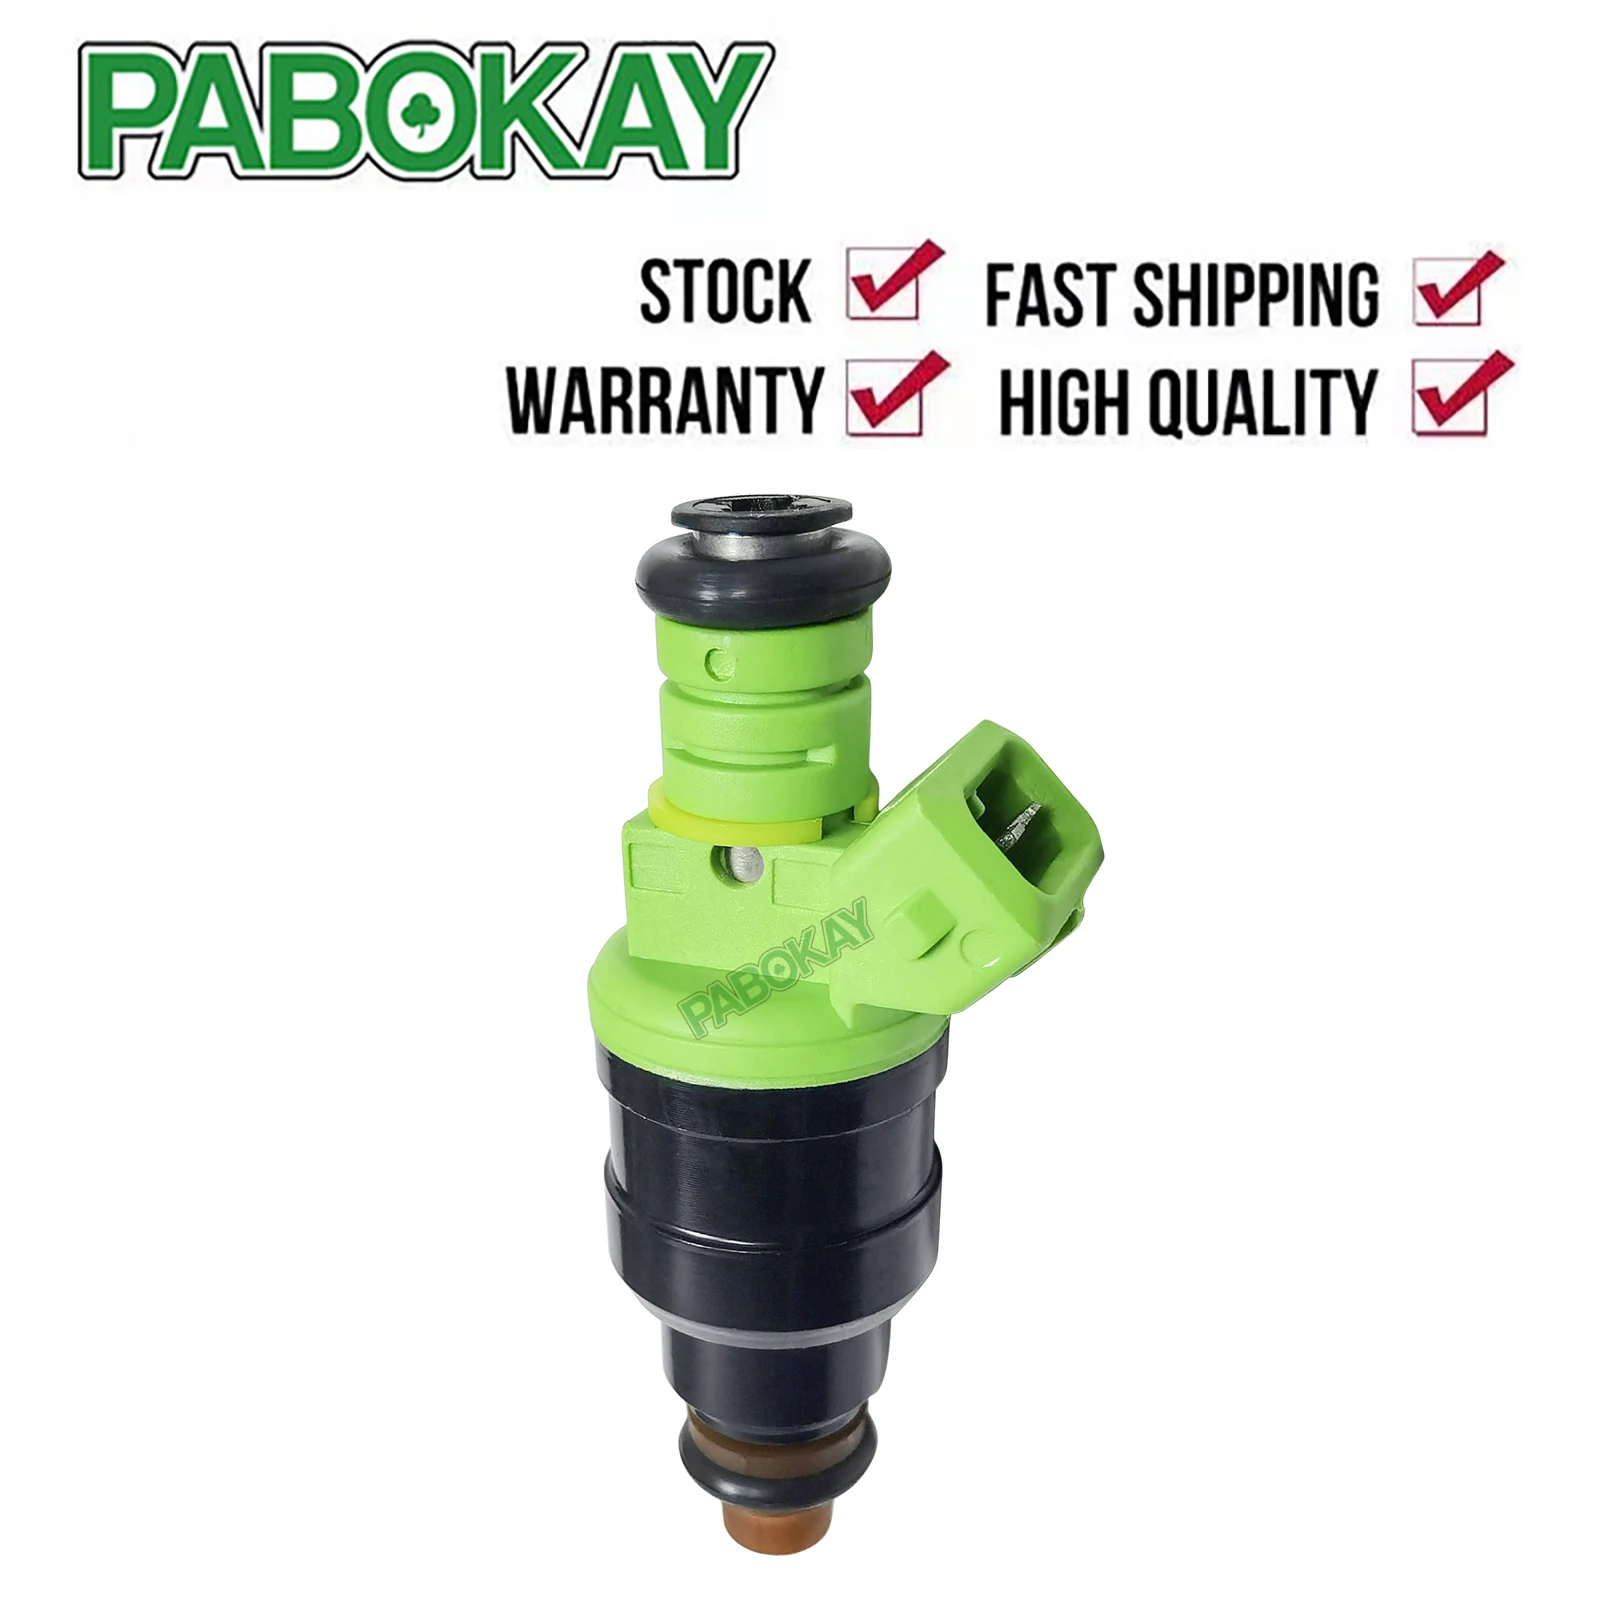 

0280150558 For VW AUDI BMW FIAT FORD 440CC EV1 Turbo 42lb/hr Green Top Racing Fuel Injector